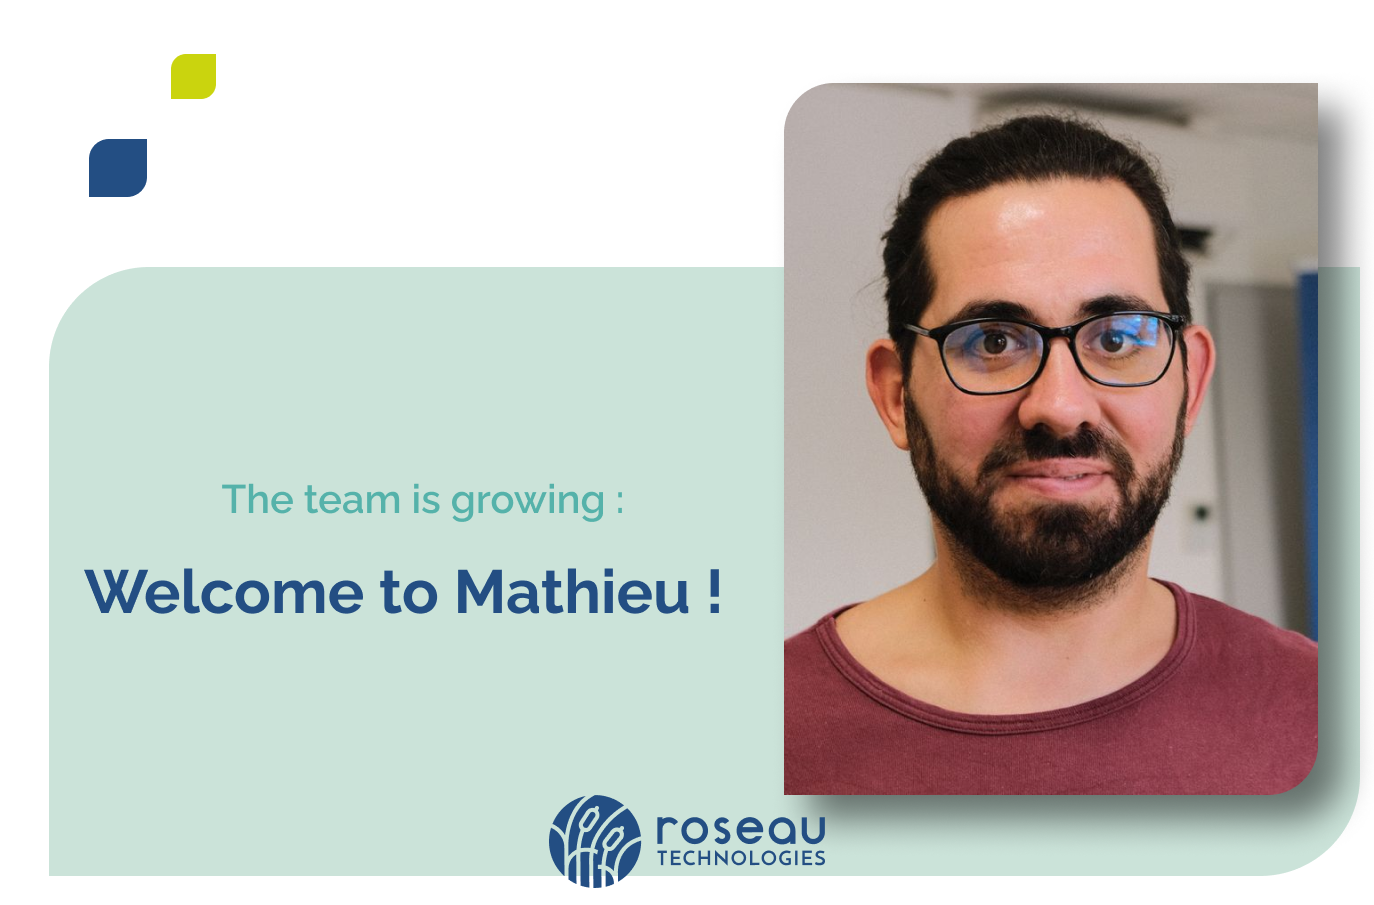 We're delighted to welcome Mathieu !